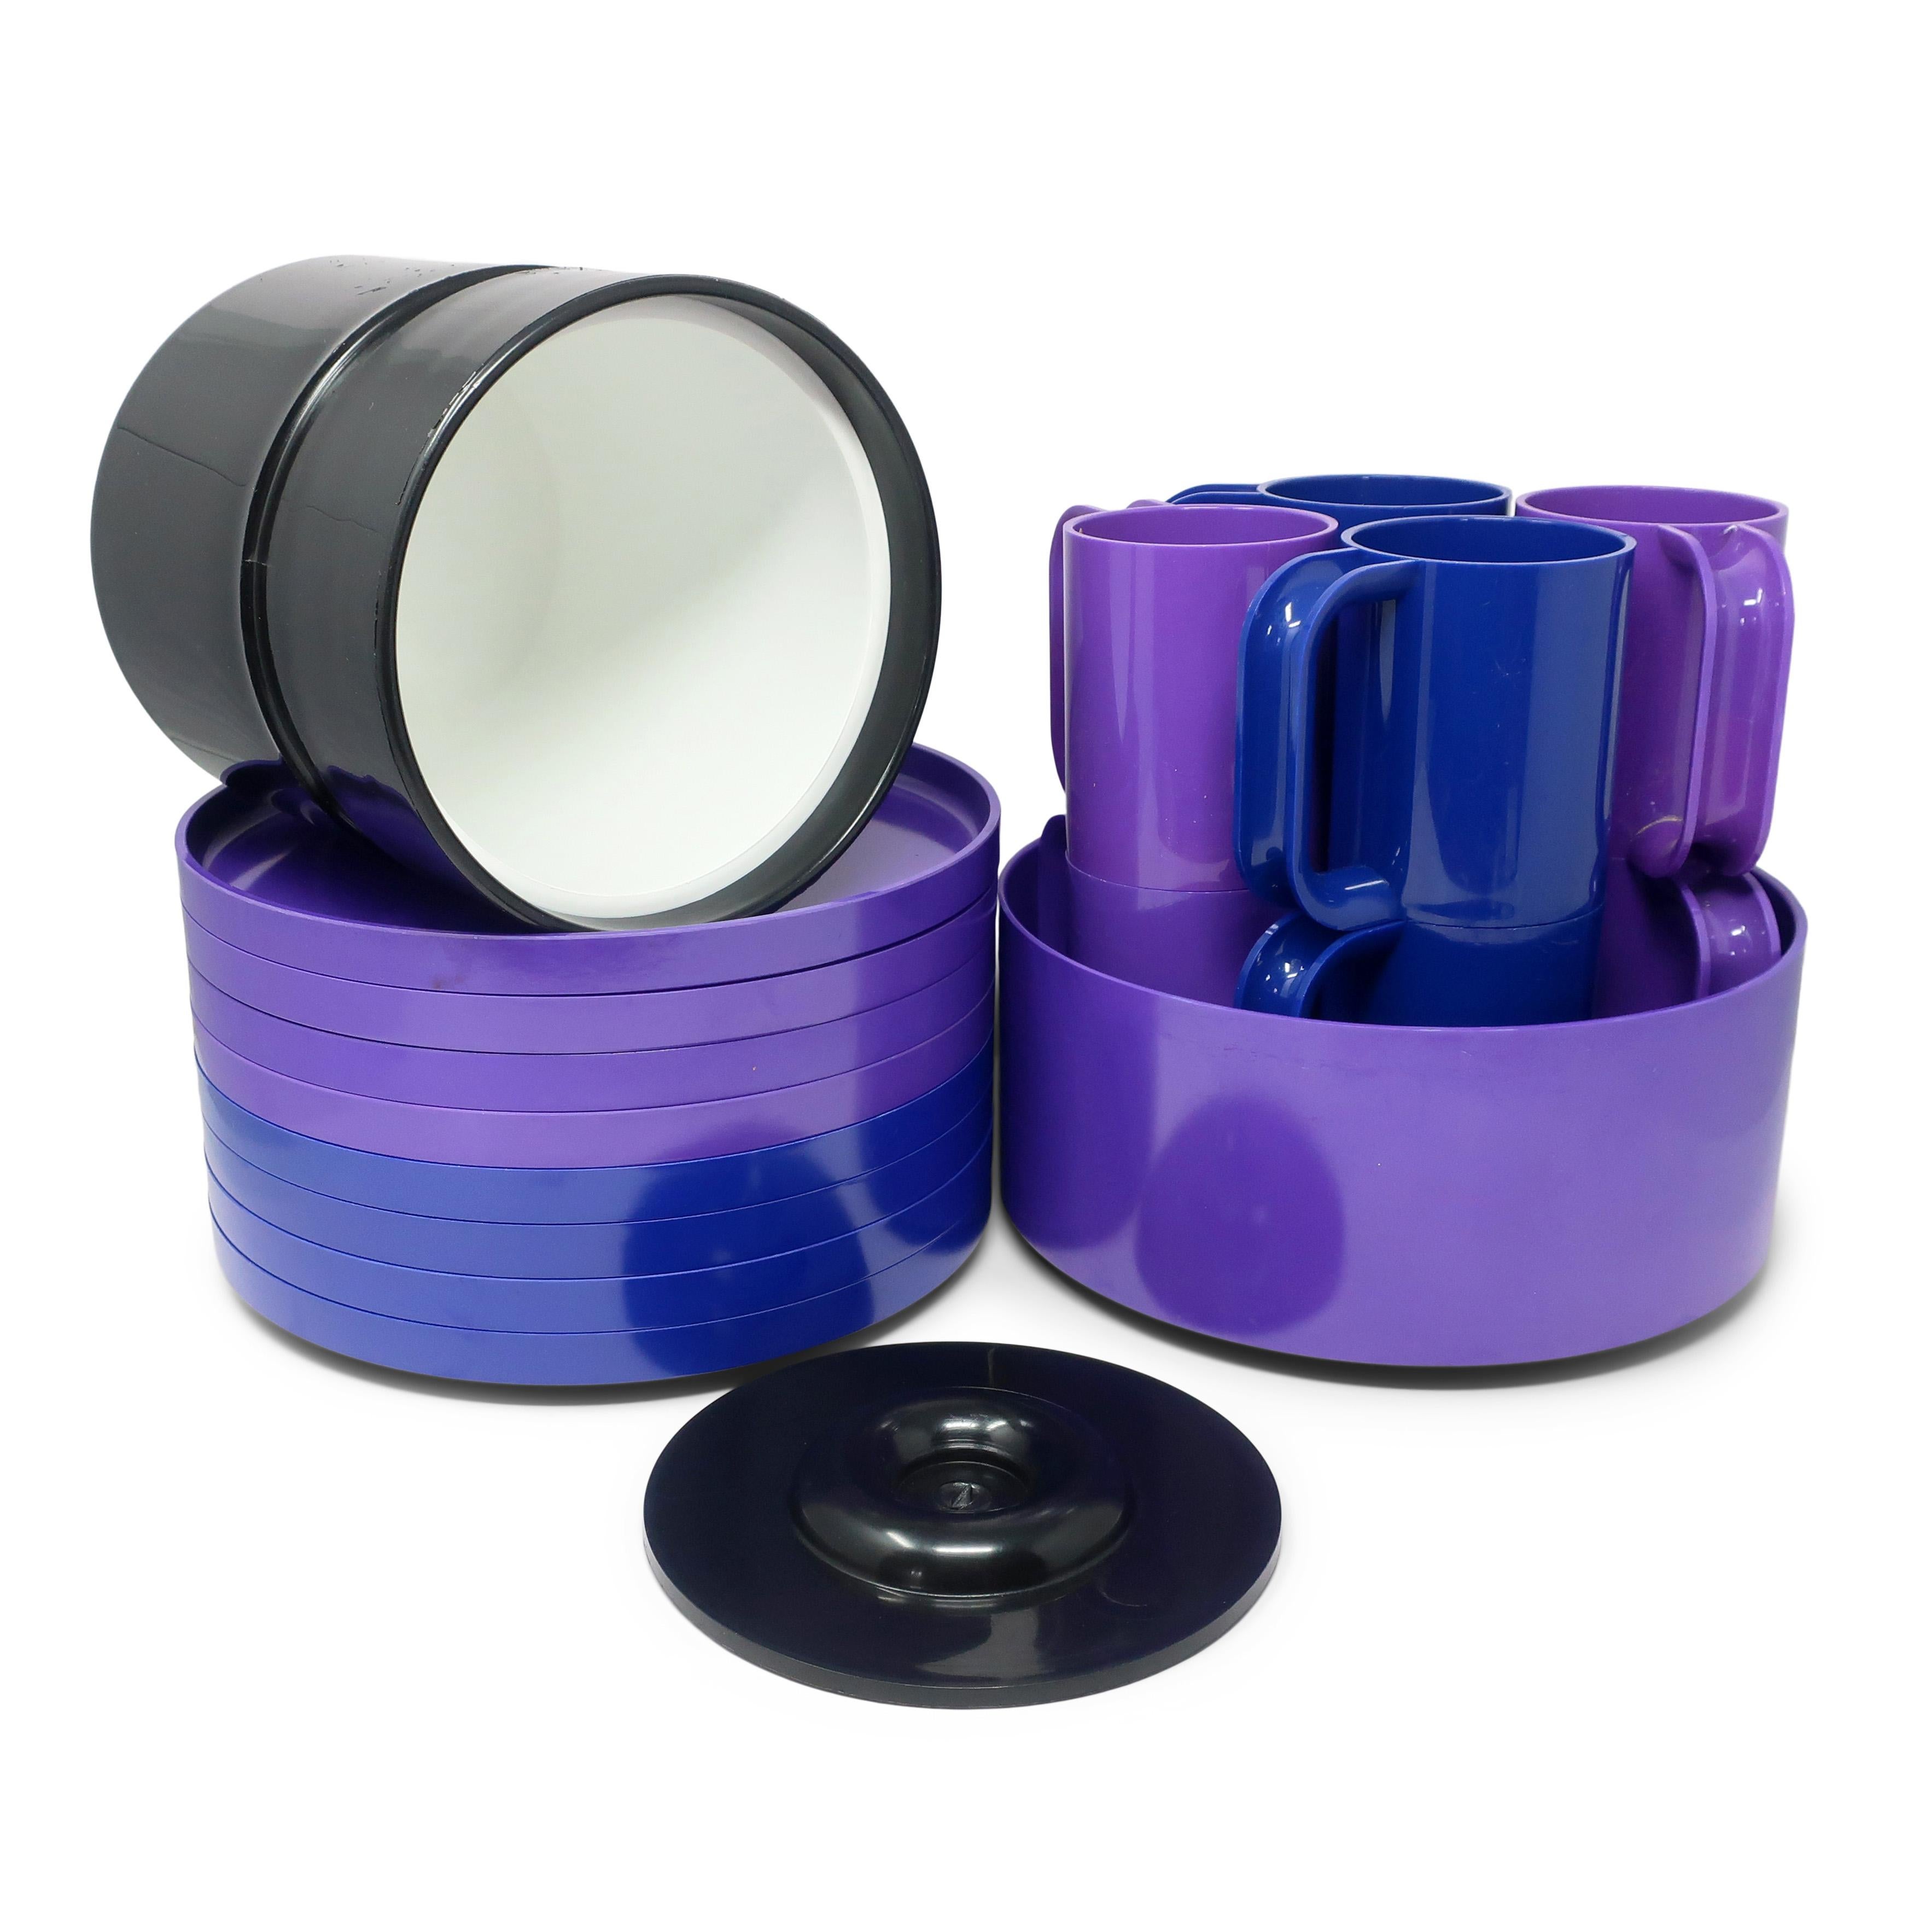 Blue, Purple and Black Massimo Vignelli for Heller Dinnerware - Set of 18 In Good Condition For Sale In Brooklyn, NY